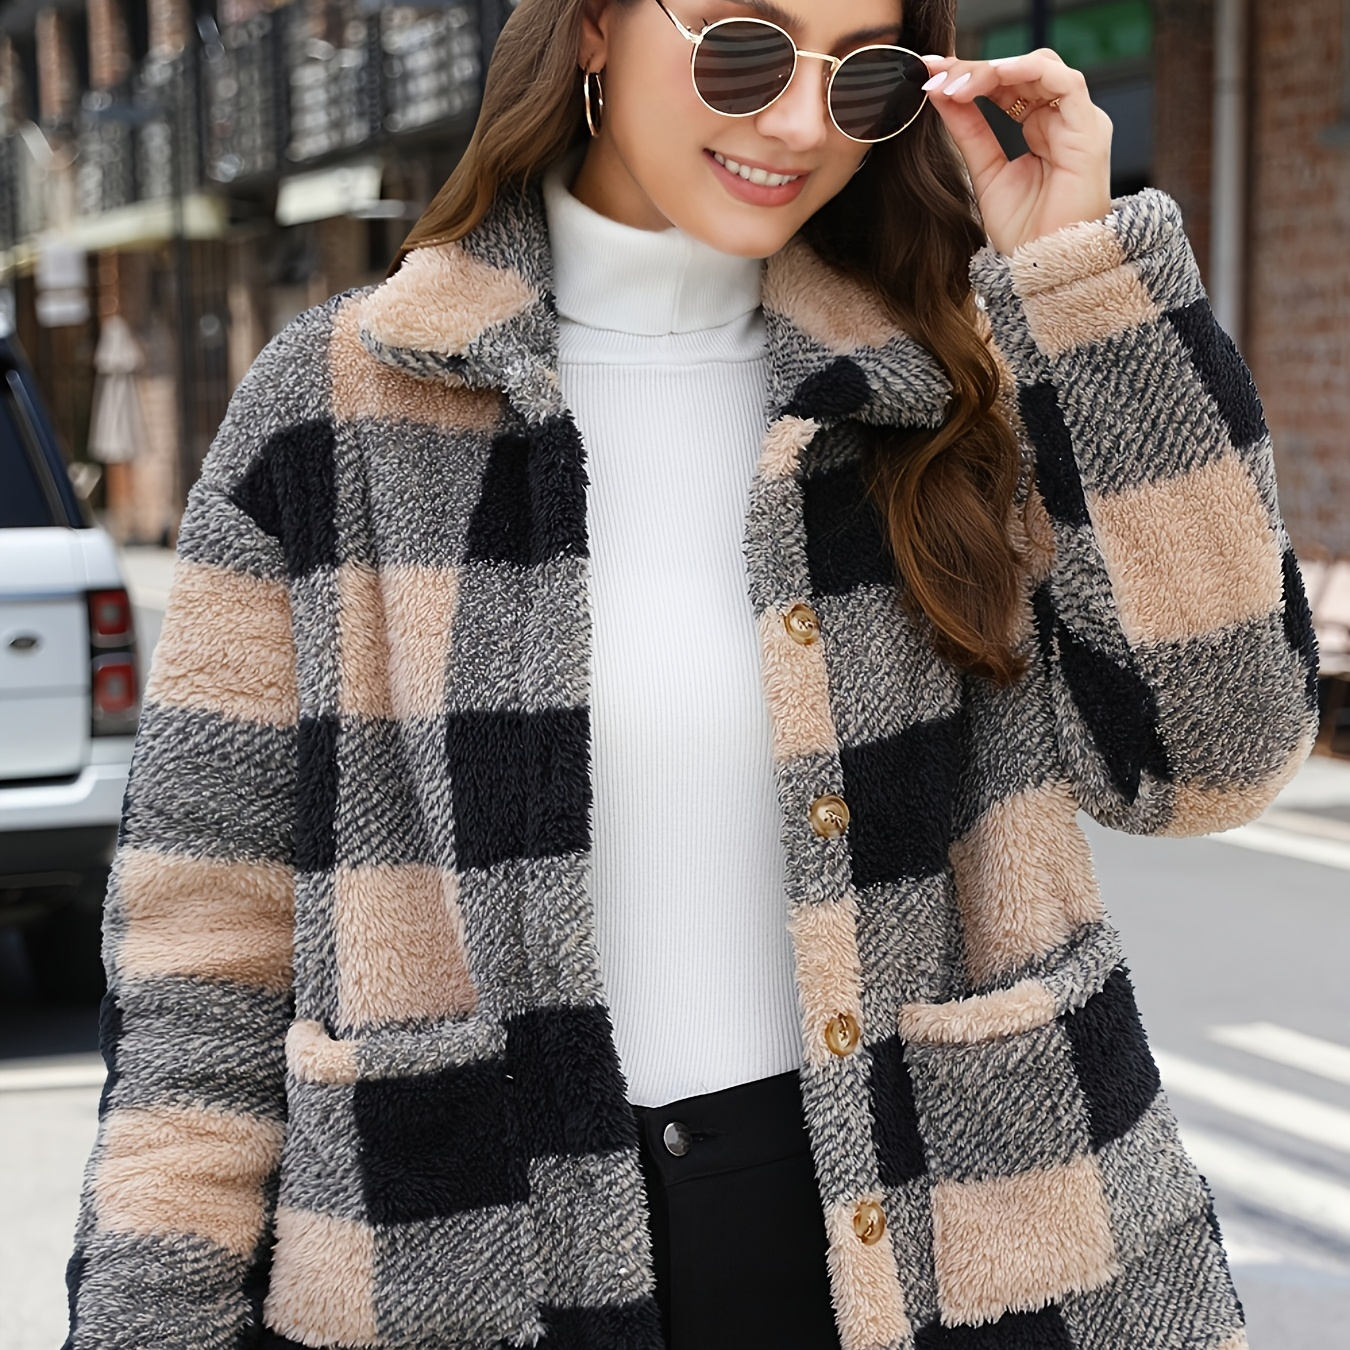 

Plaid Print Patched Pockets Teddy Coat, Versatile Long Sleeve Single Breasted Winter Outwear, Women's Clothing